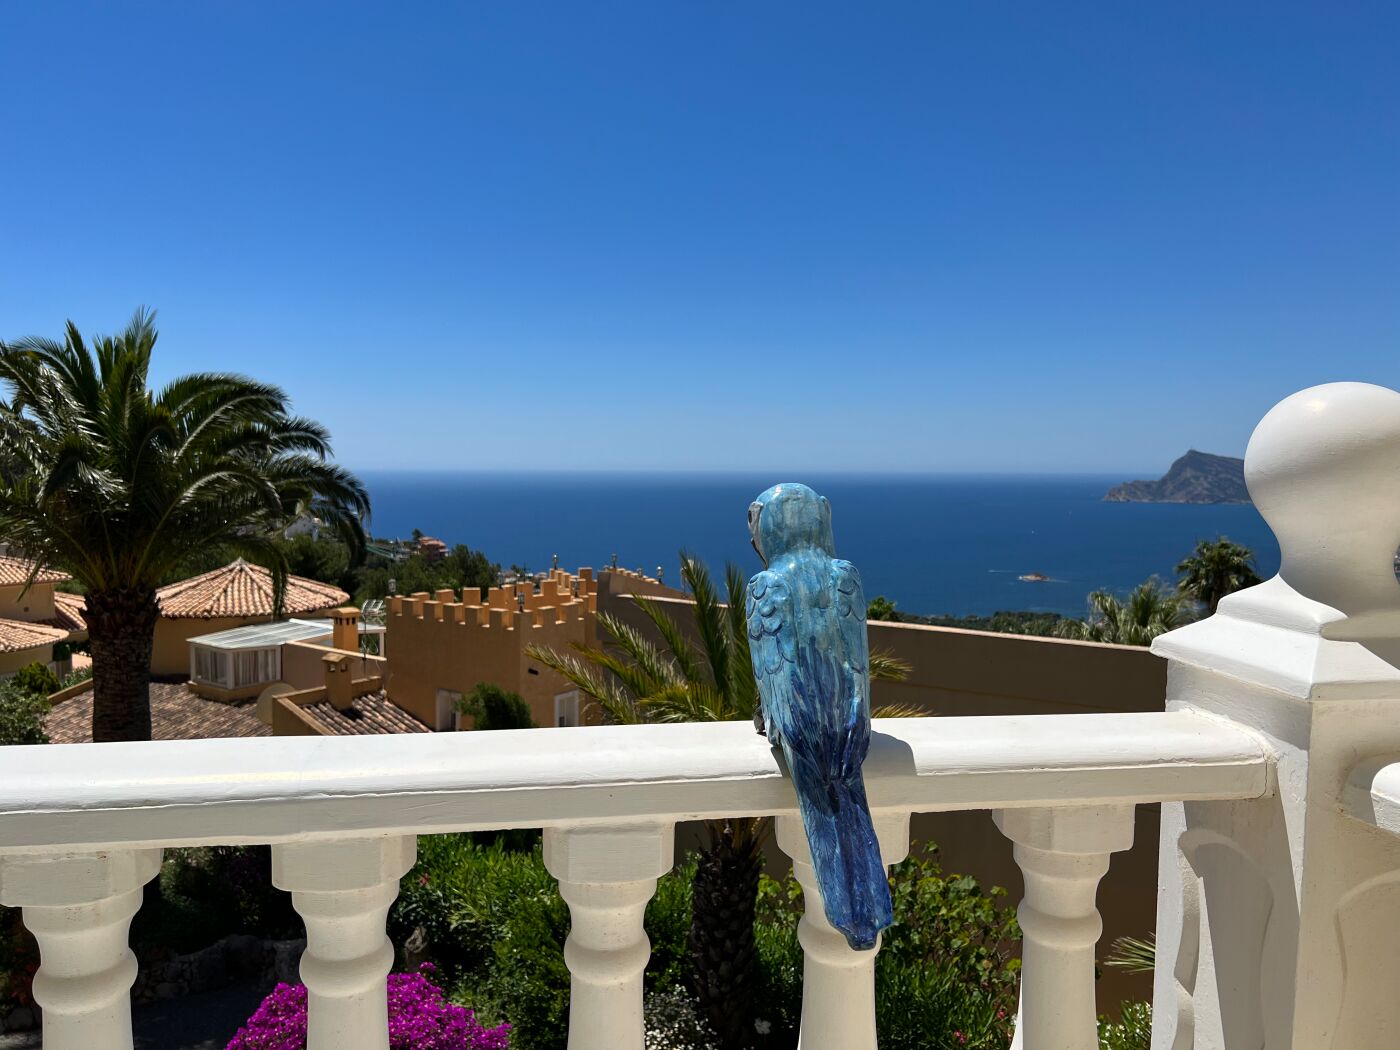 Villa with lovely garden and beautiful sea views in Altea Hills!